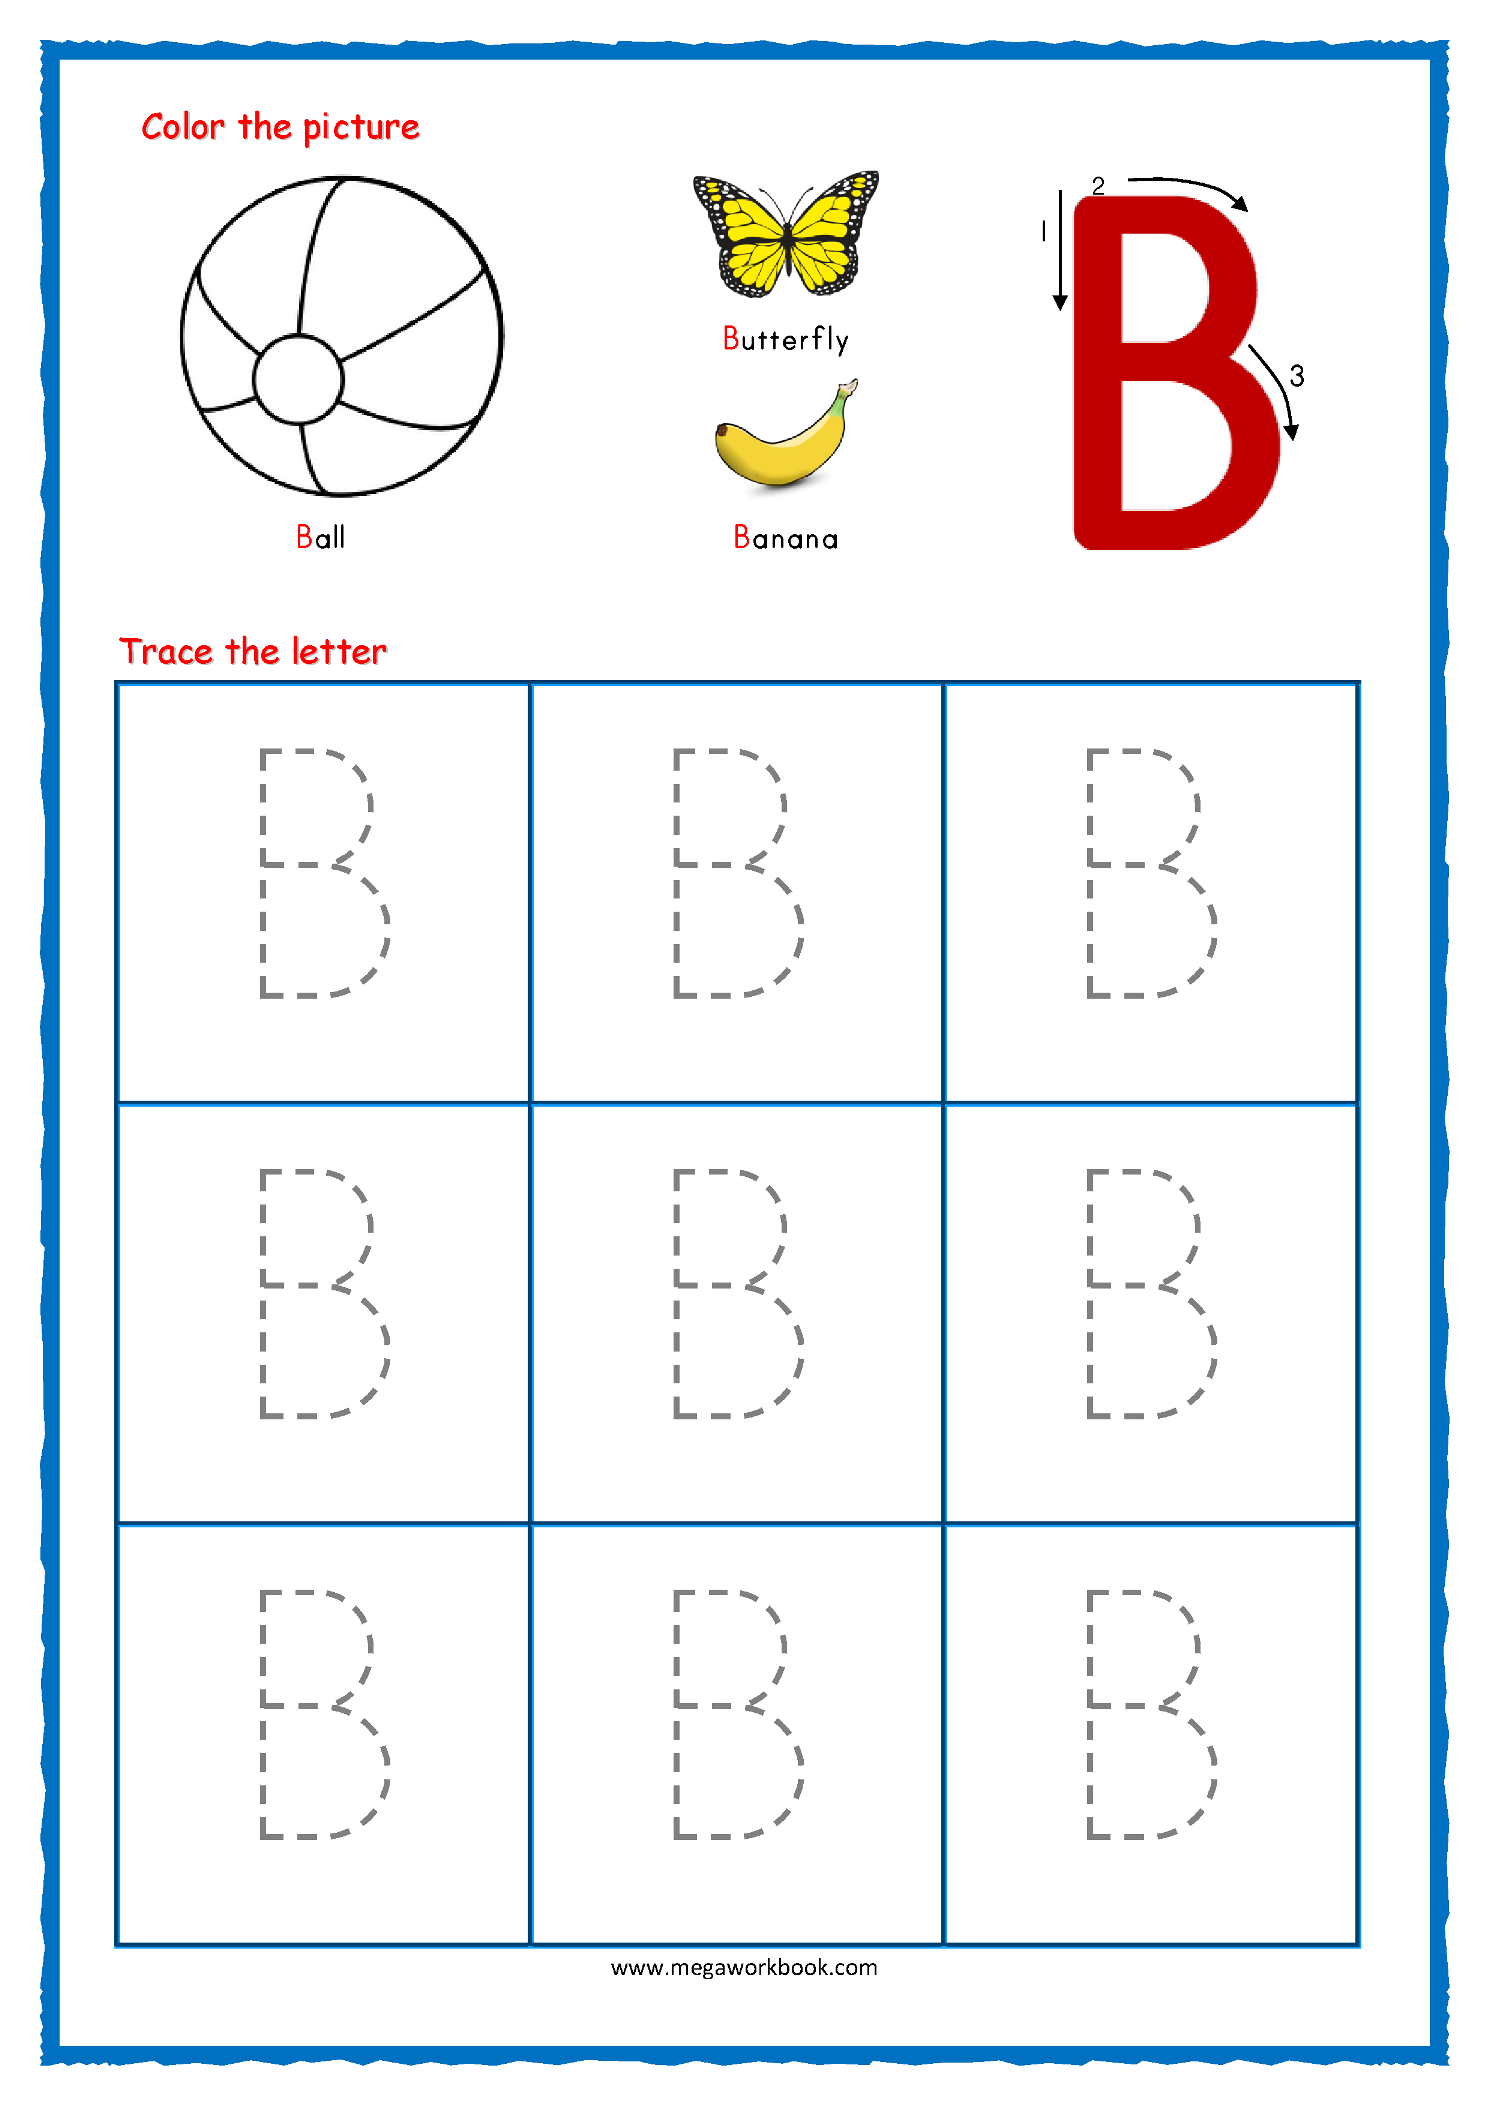 Worksheet ~ Worksheet Capital Letter Tracing With Crayons 02